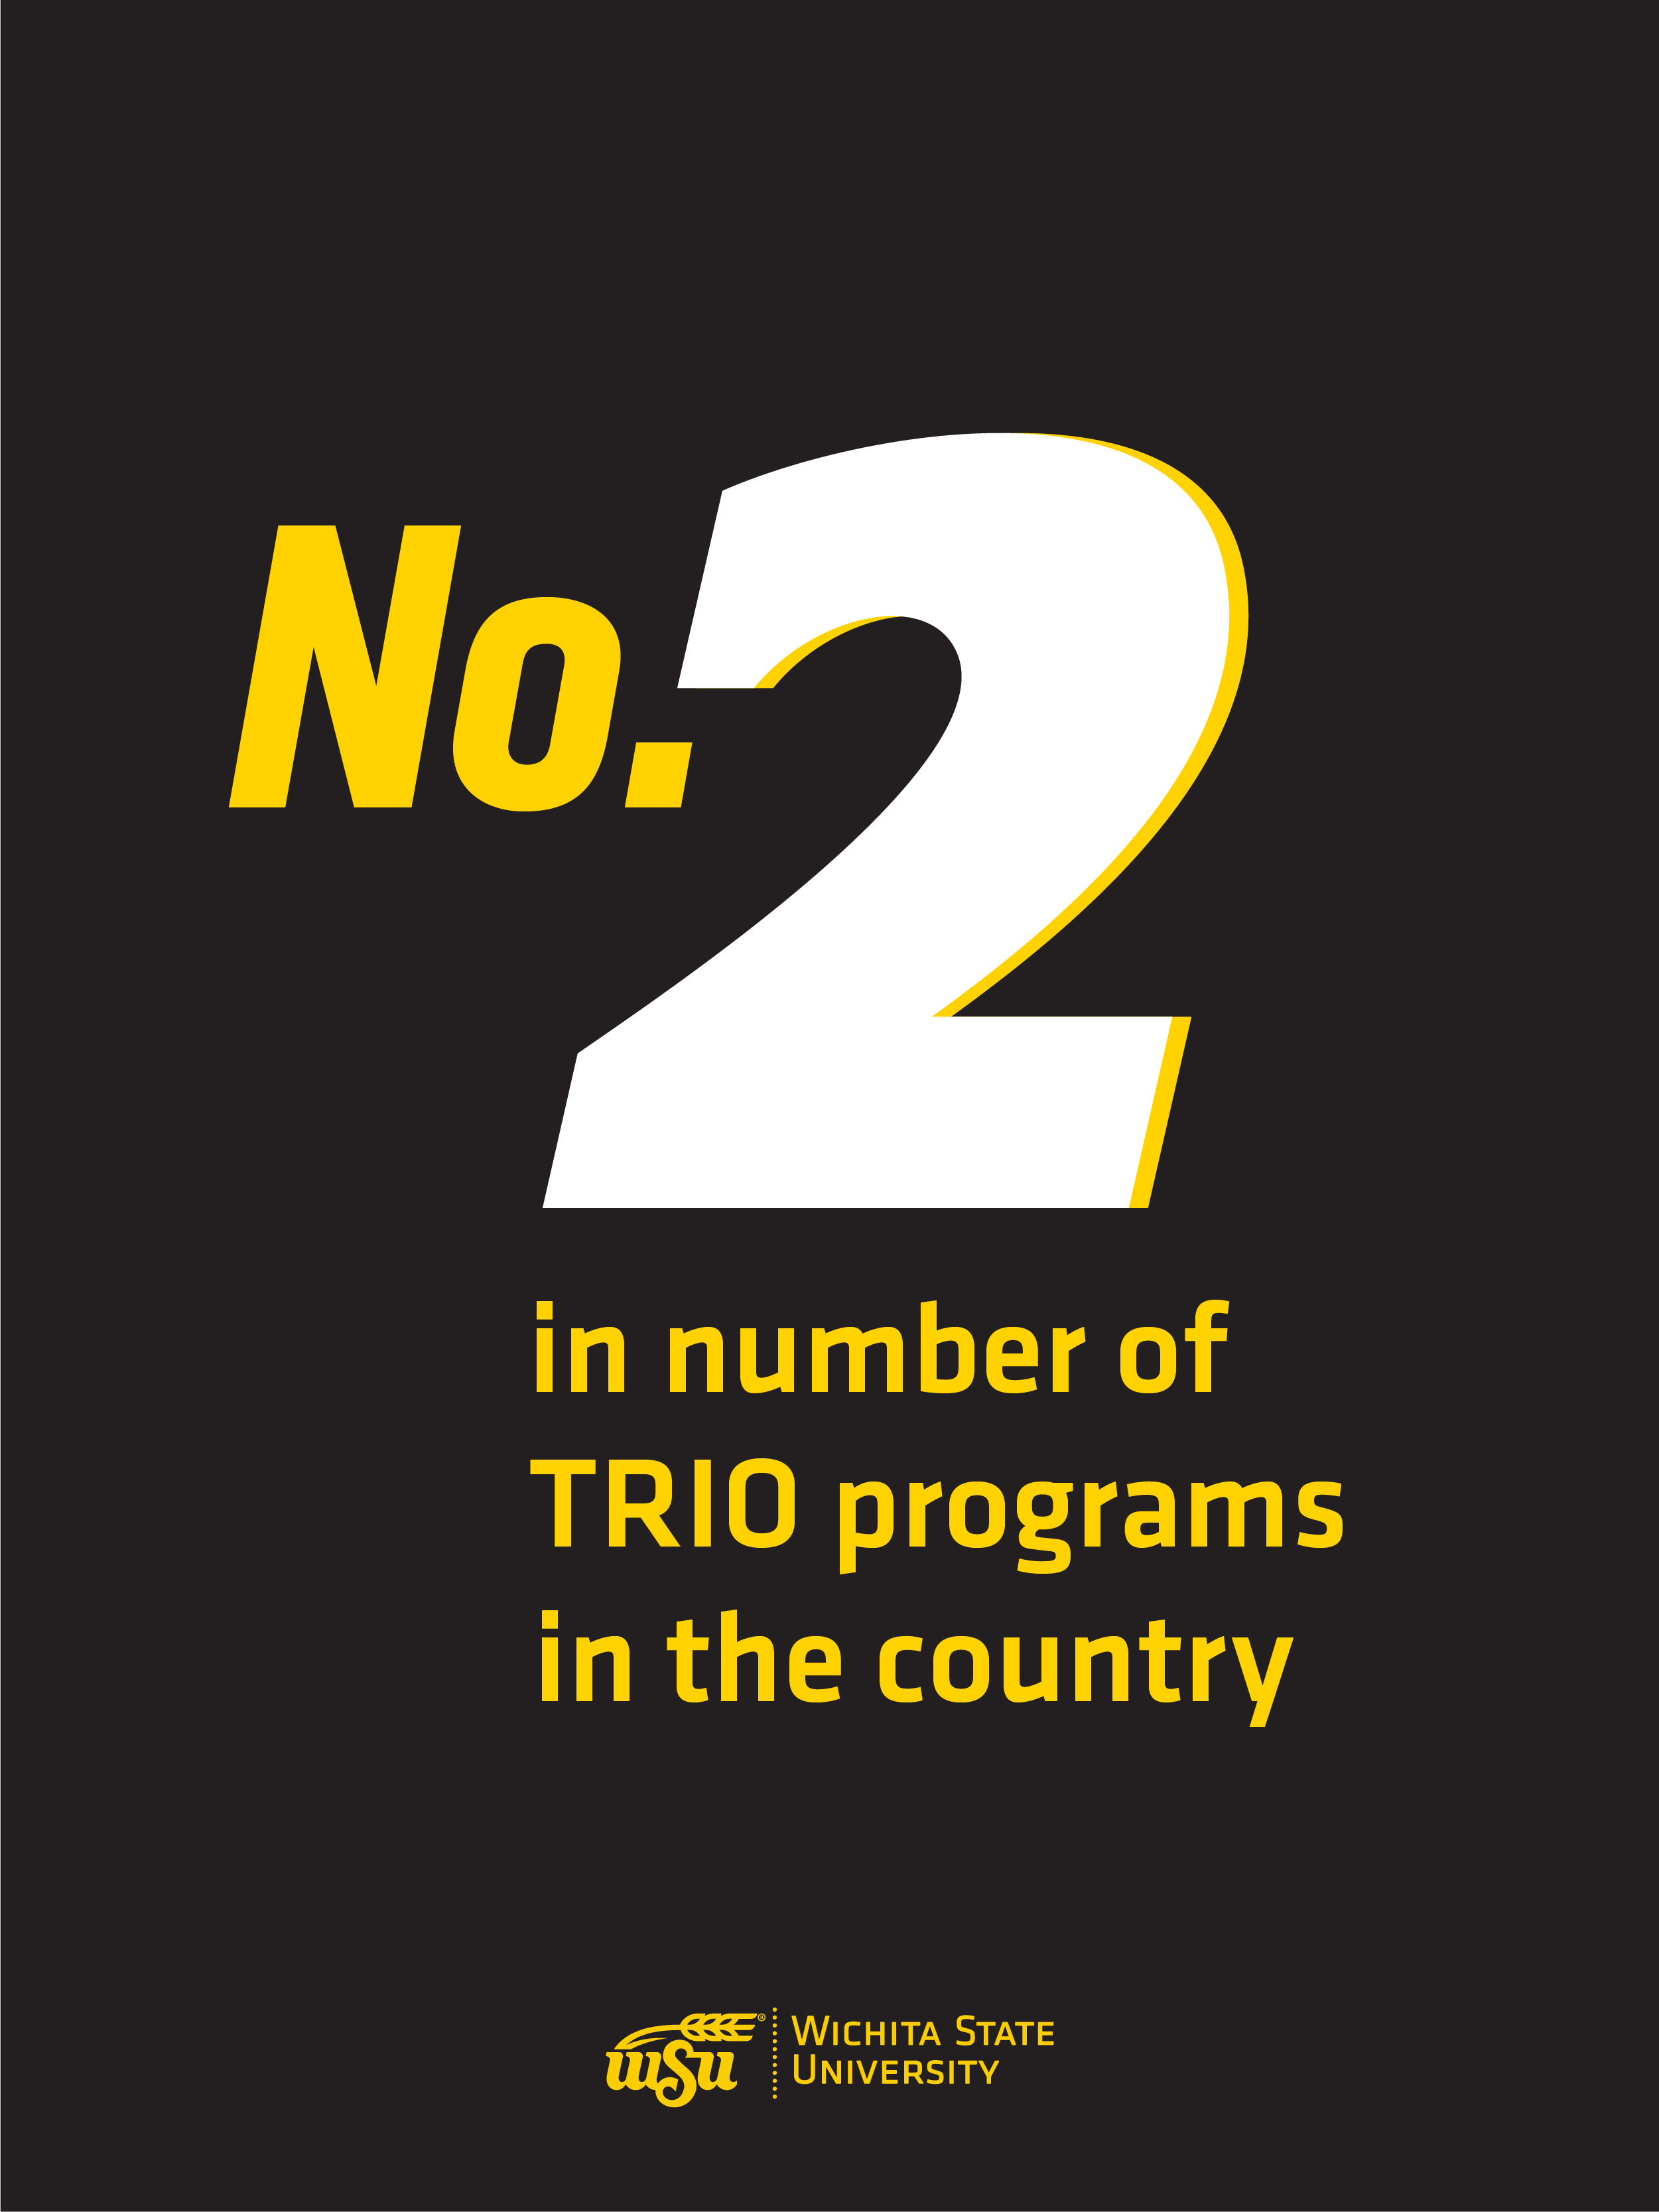 Infographic: No. 2 in number of TRIO programs in the country